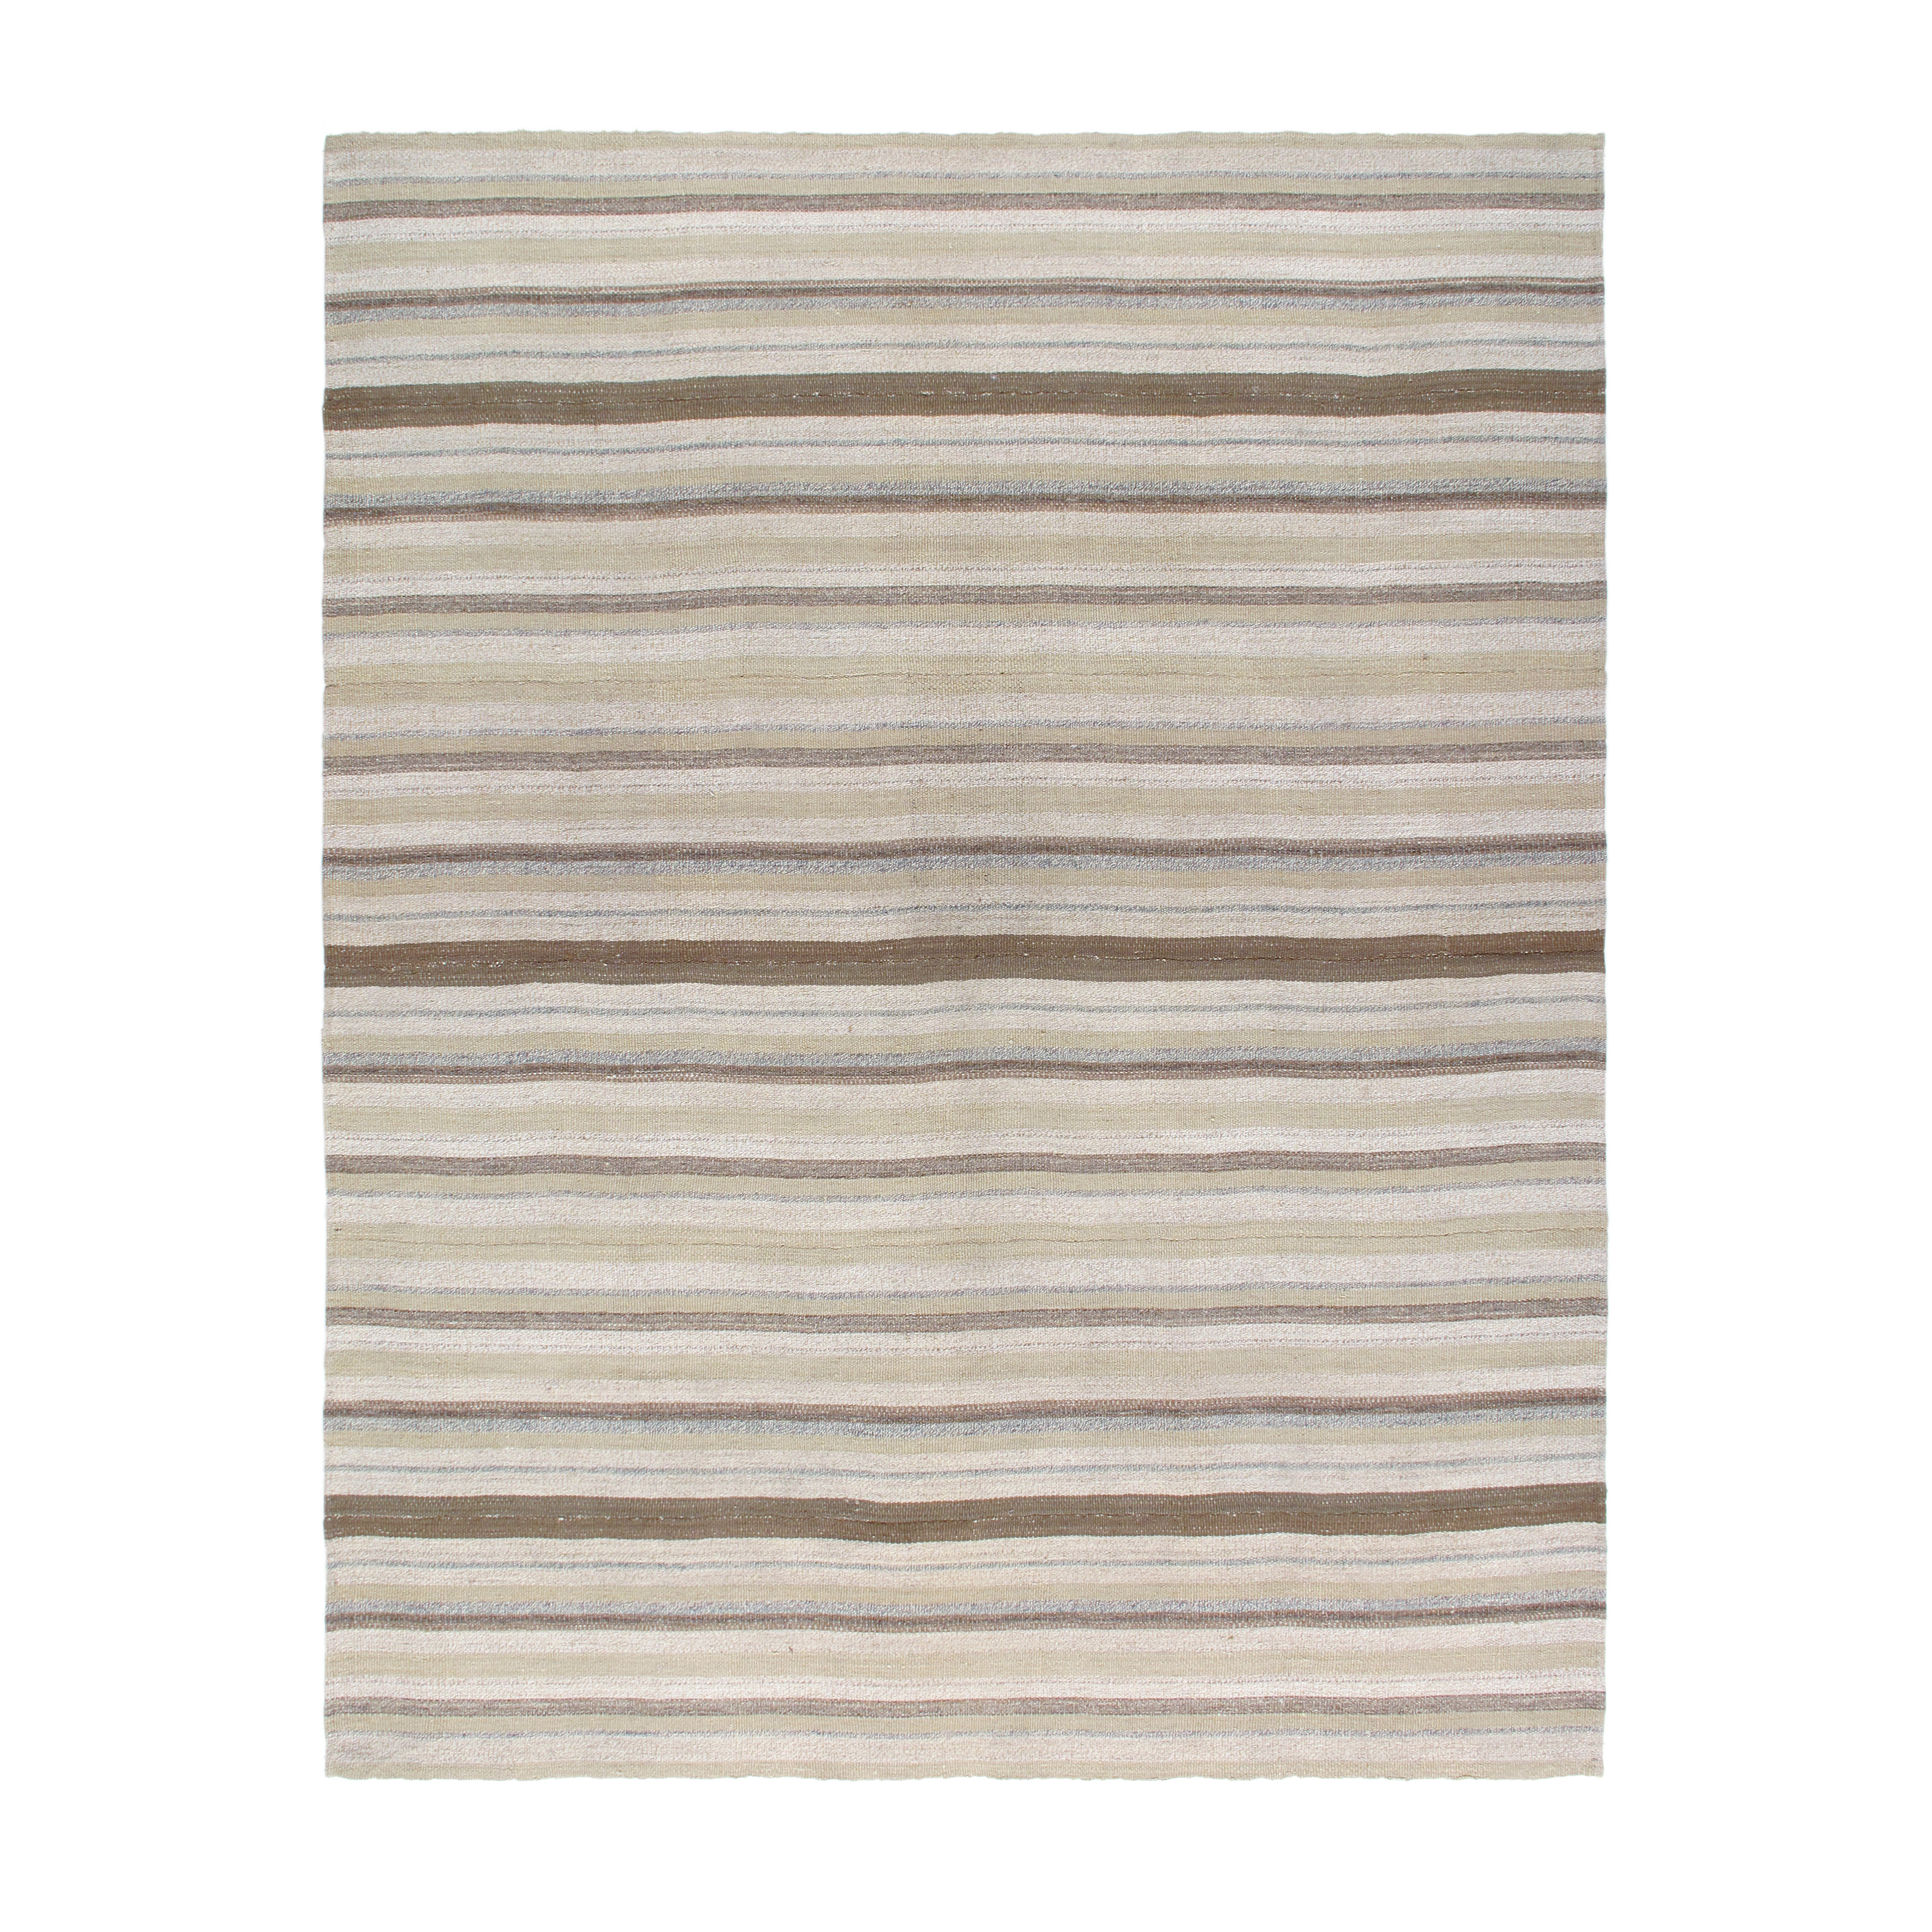 This Pelas flatweave rug is made with handspun wool and natural dyes.